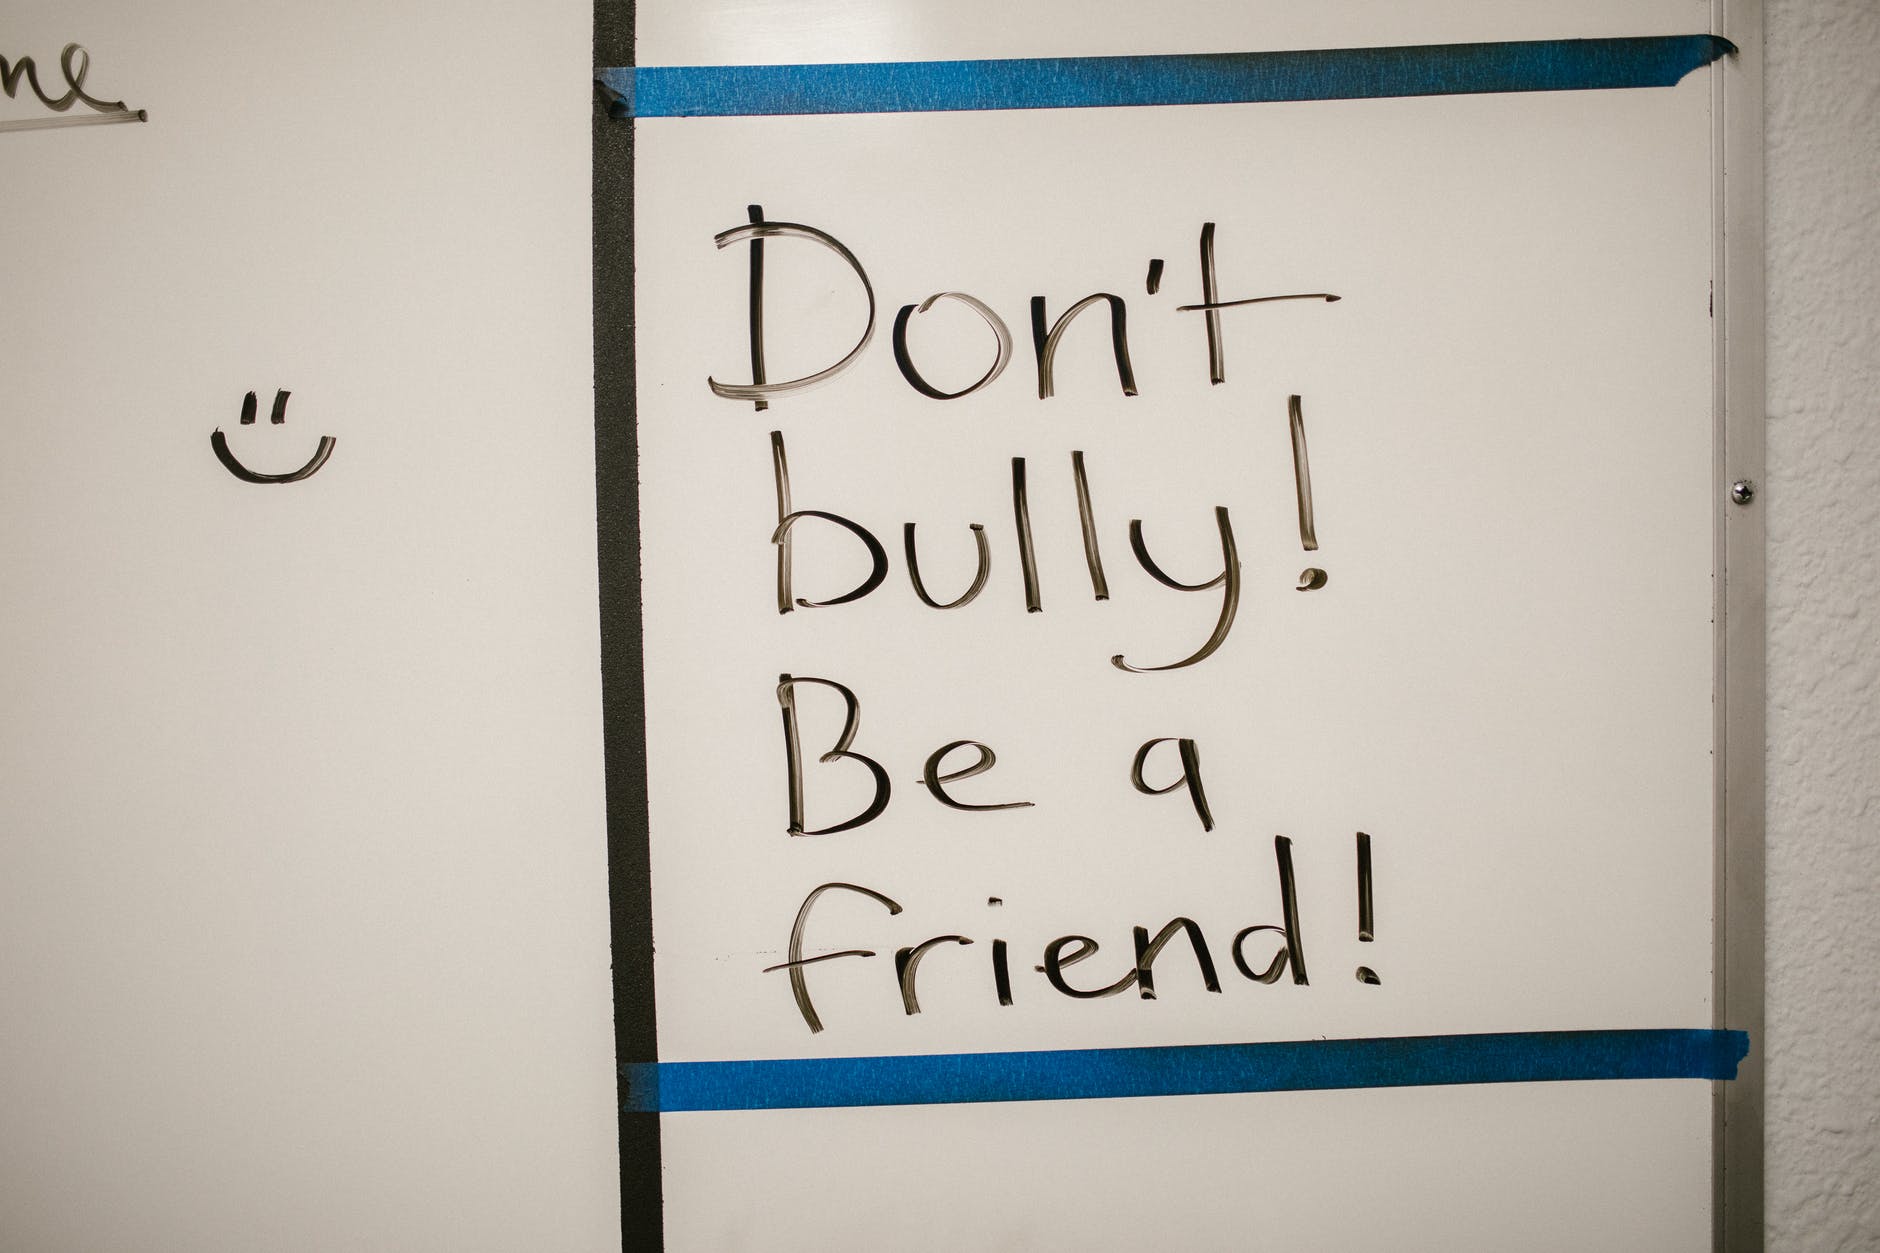 message against bullying